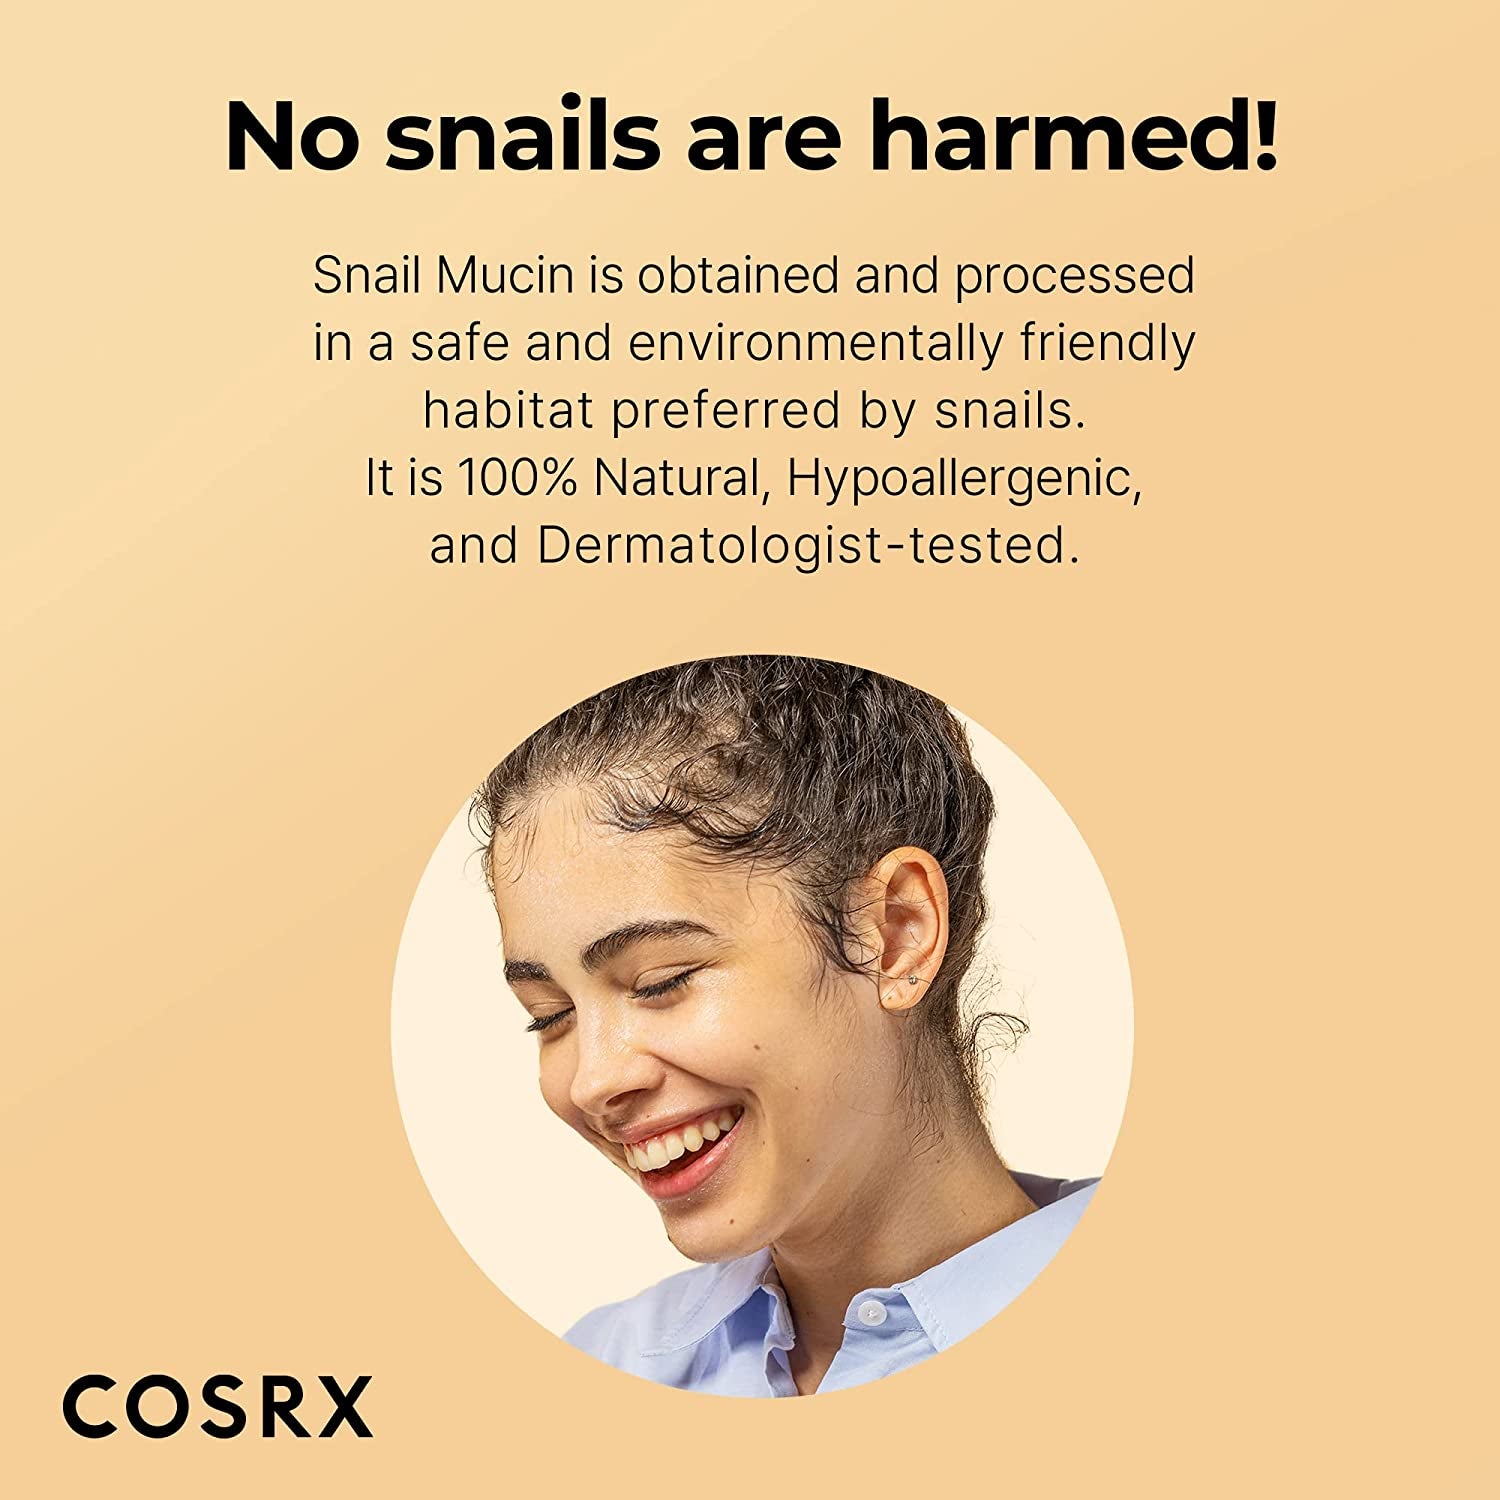 COSRX Snail Mucin Sheet Mask 10 EA, Snail Essence Leave-On Face Masks for Dry, Acne Prone, Sensitive Skin, Snail Secretion Filtrate, Not Tested on Animals, No Parabens, No Sulfates, Korean Skincare